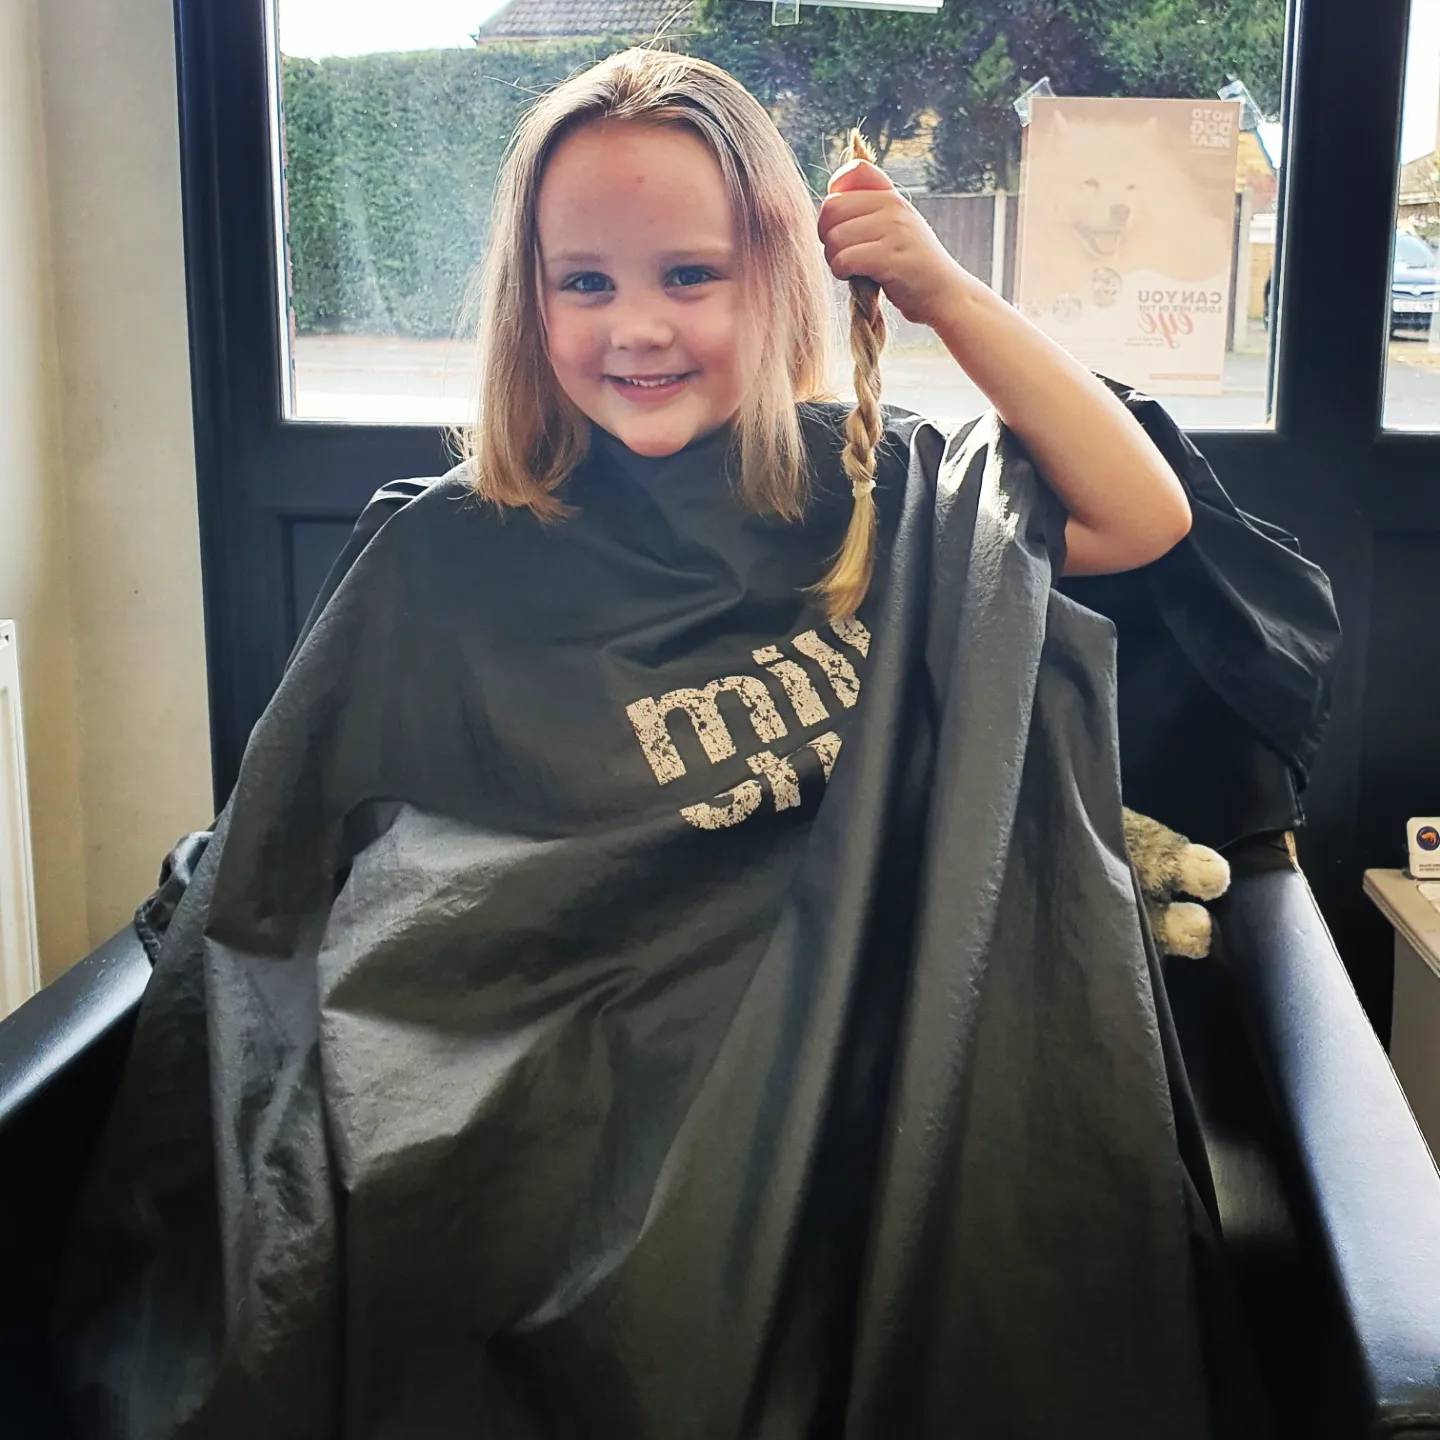 4yr old Amelie's Big 10-inch Haircut for The Little Princess Trust